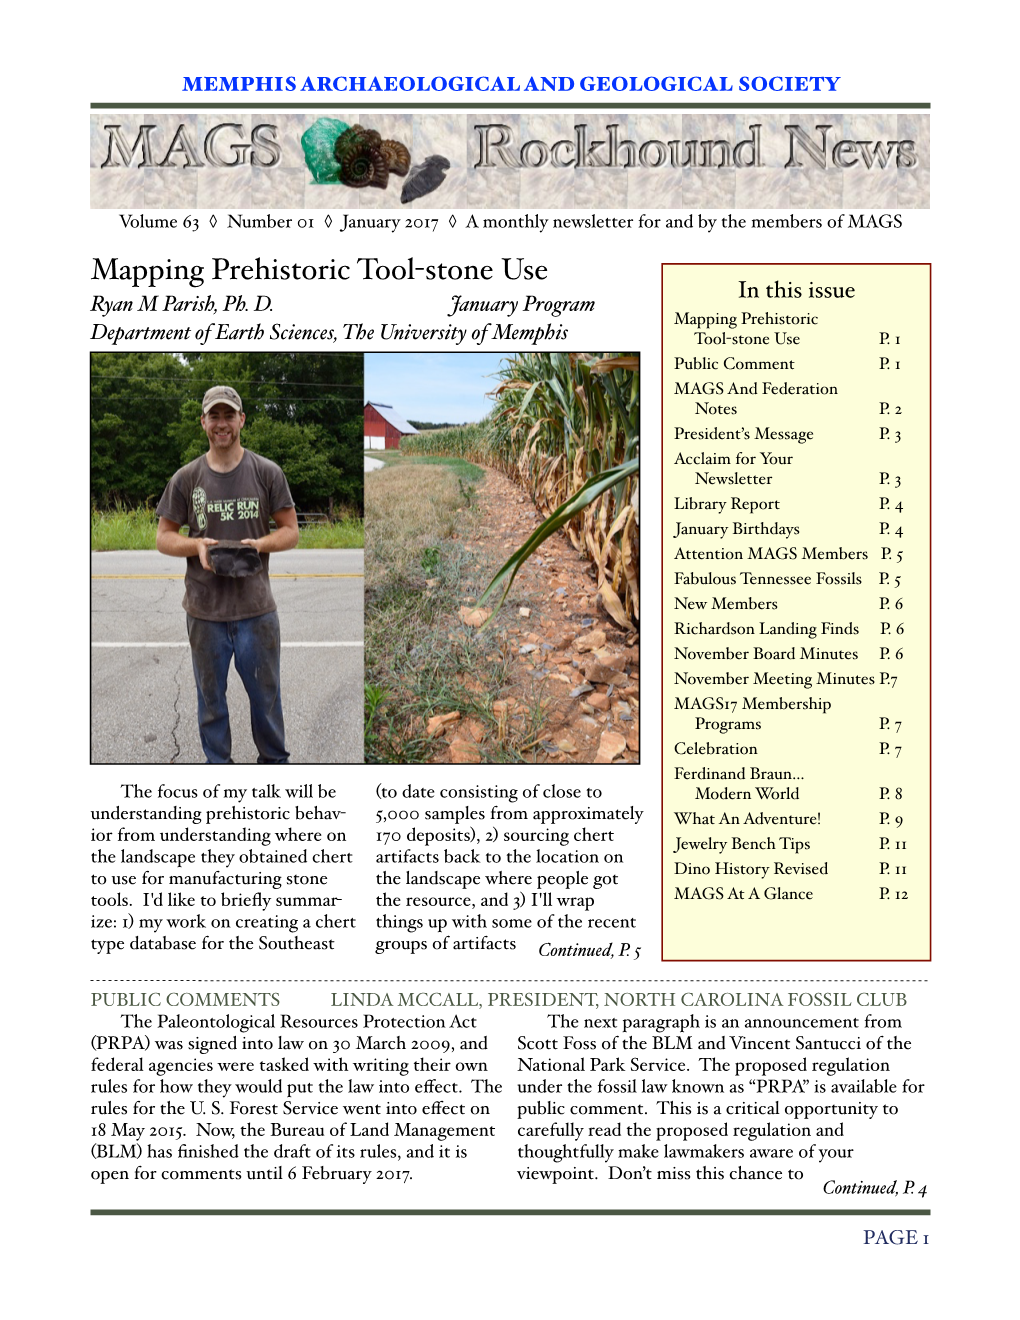 January 2017 ◊ a Monthly Newsletter for and by the Members of MAGS Mapping Prehistoric Tool-Stone Use in This Issue Ryan M Parish, Ph